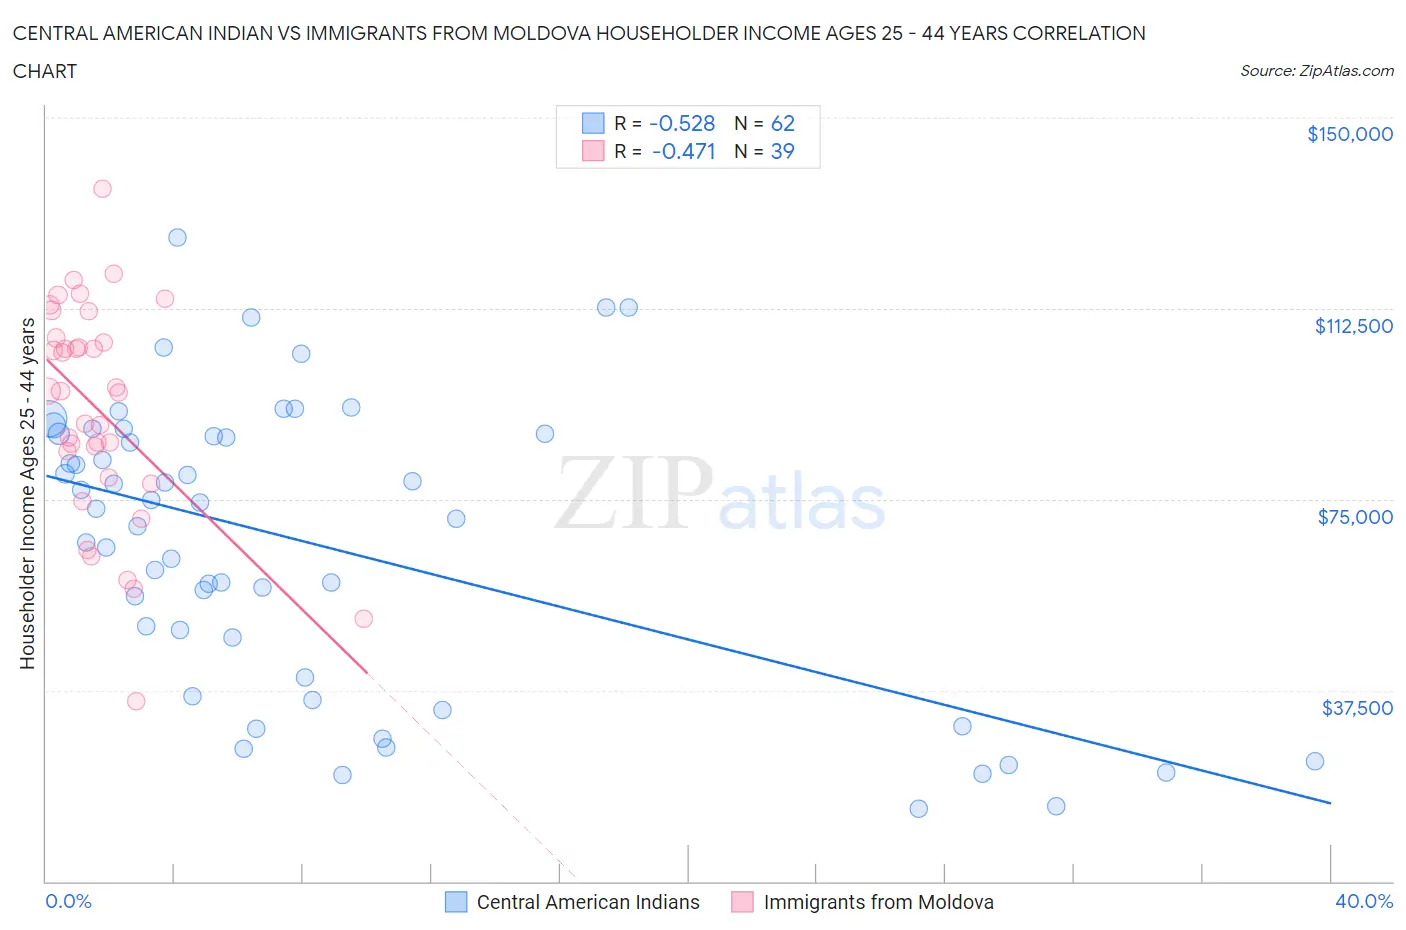 Central American Indian vs Immigrants from Moldova Householder Income Ages 25 - 44 years